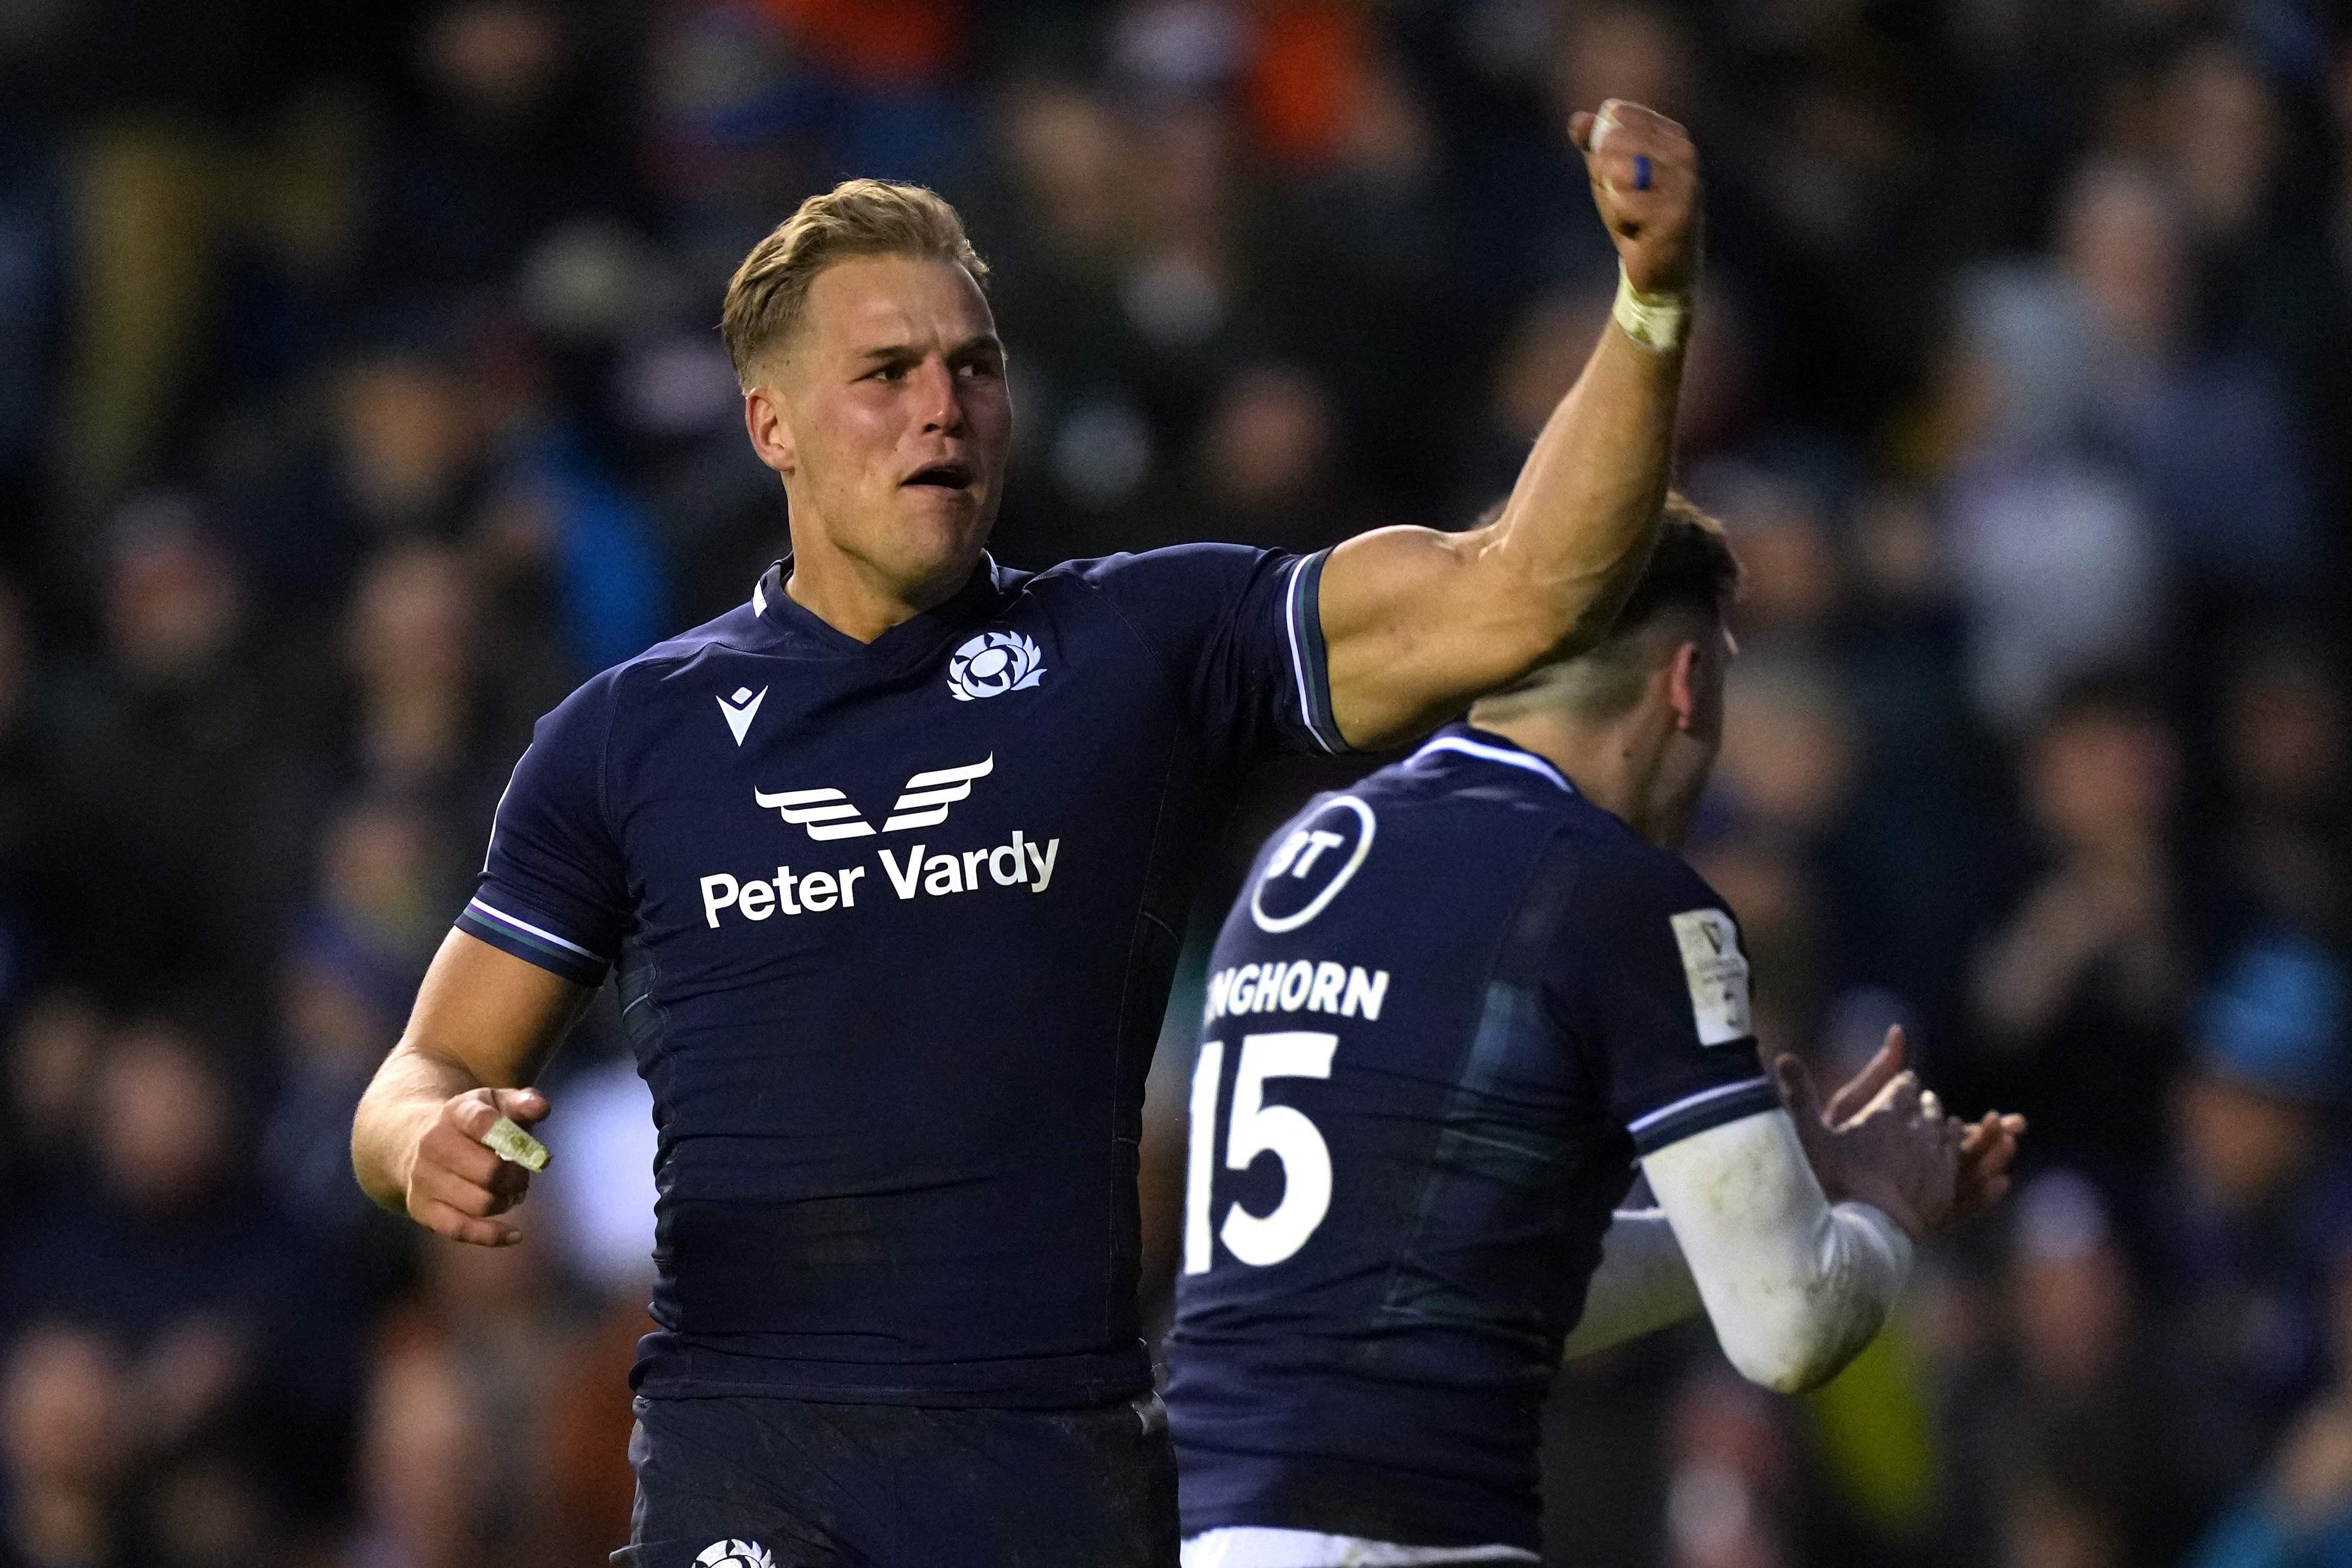 Duhan van der Merwe says Scotland come before personal glory in Six Nations